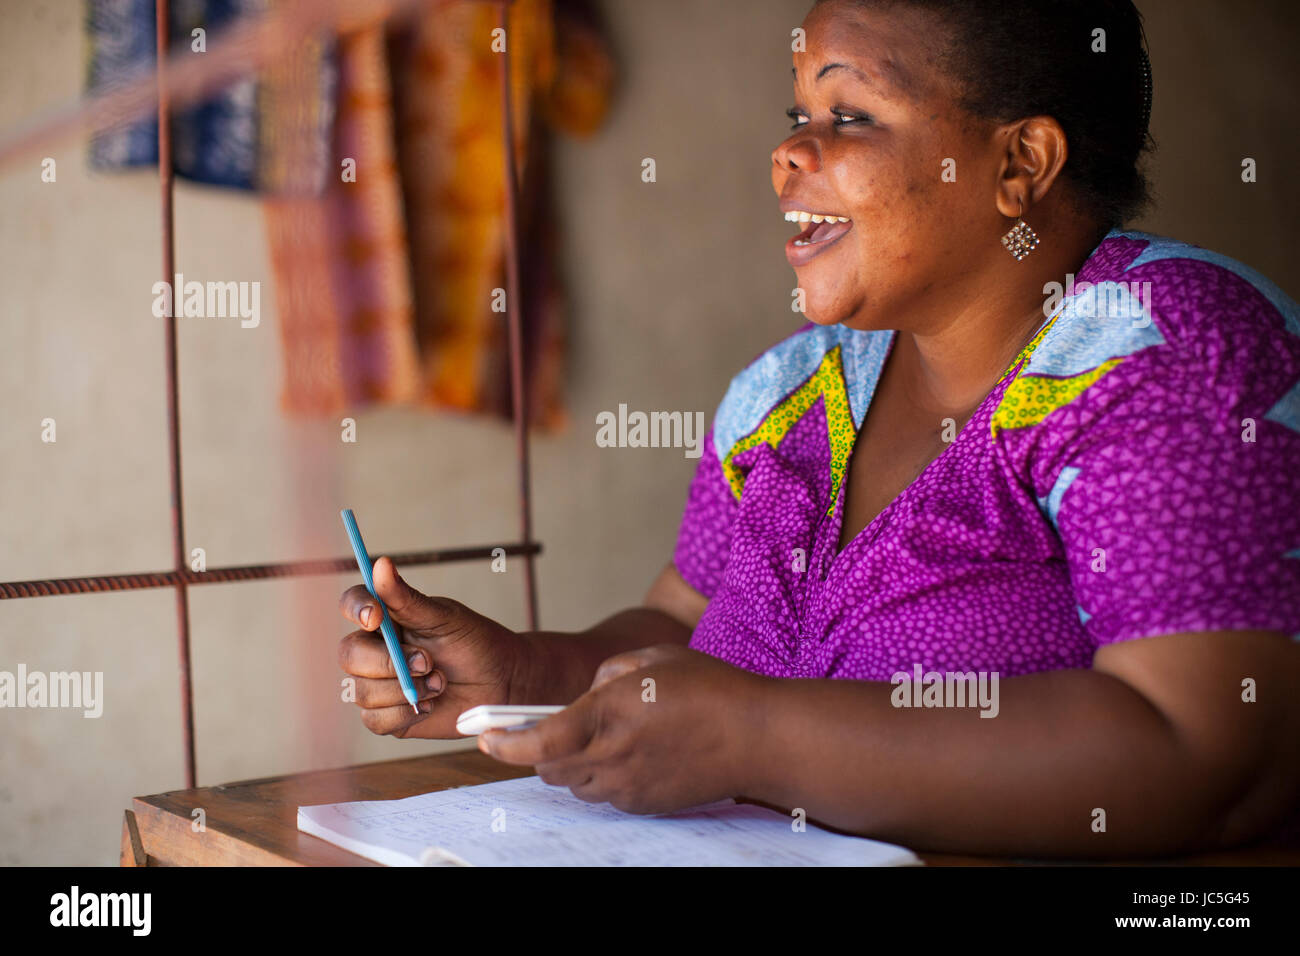 A female small business owner doing some book keeping, Tanzania, Africa Stock Photo